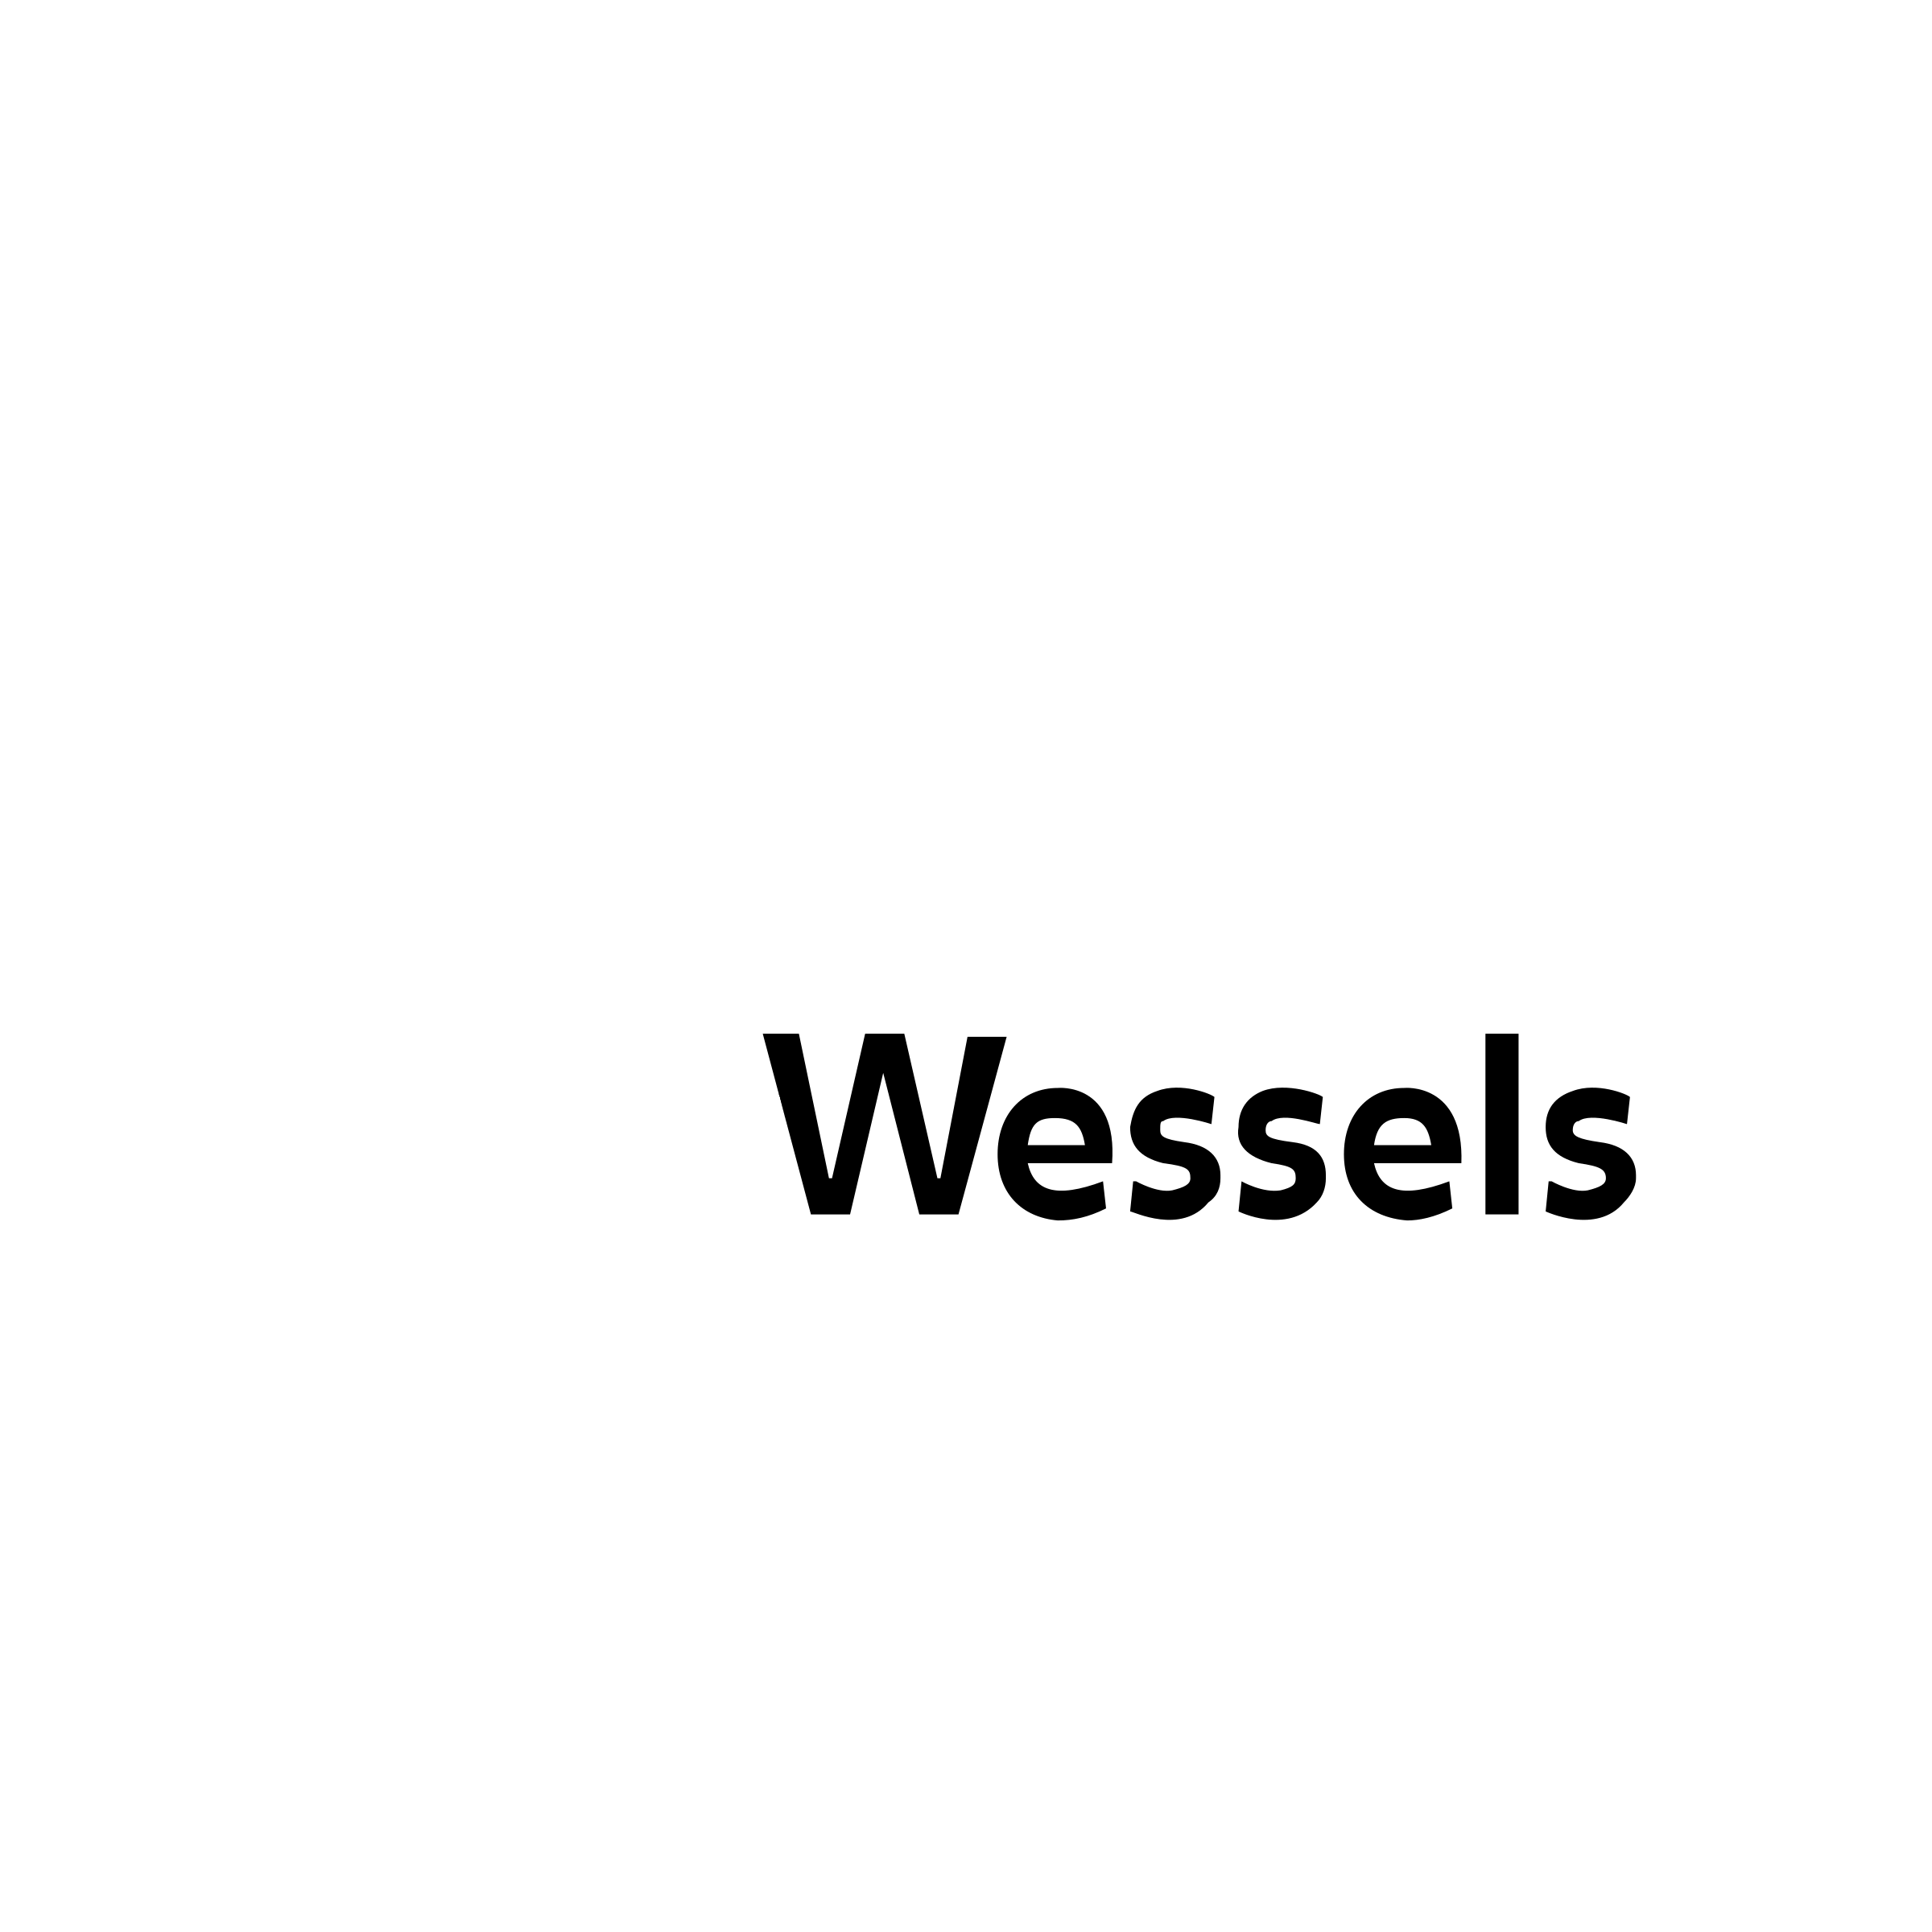 volkerwessels-logo-black-and-white